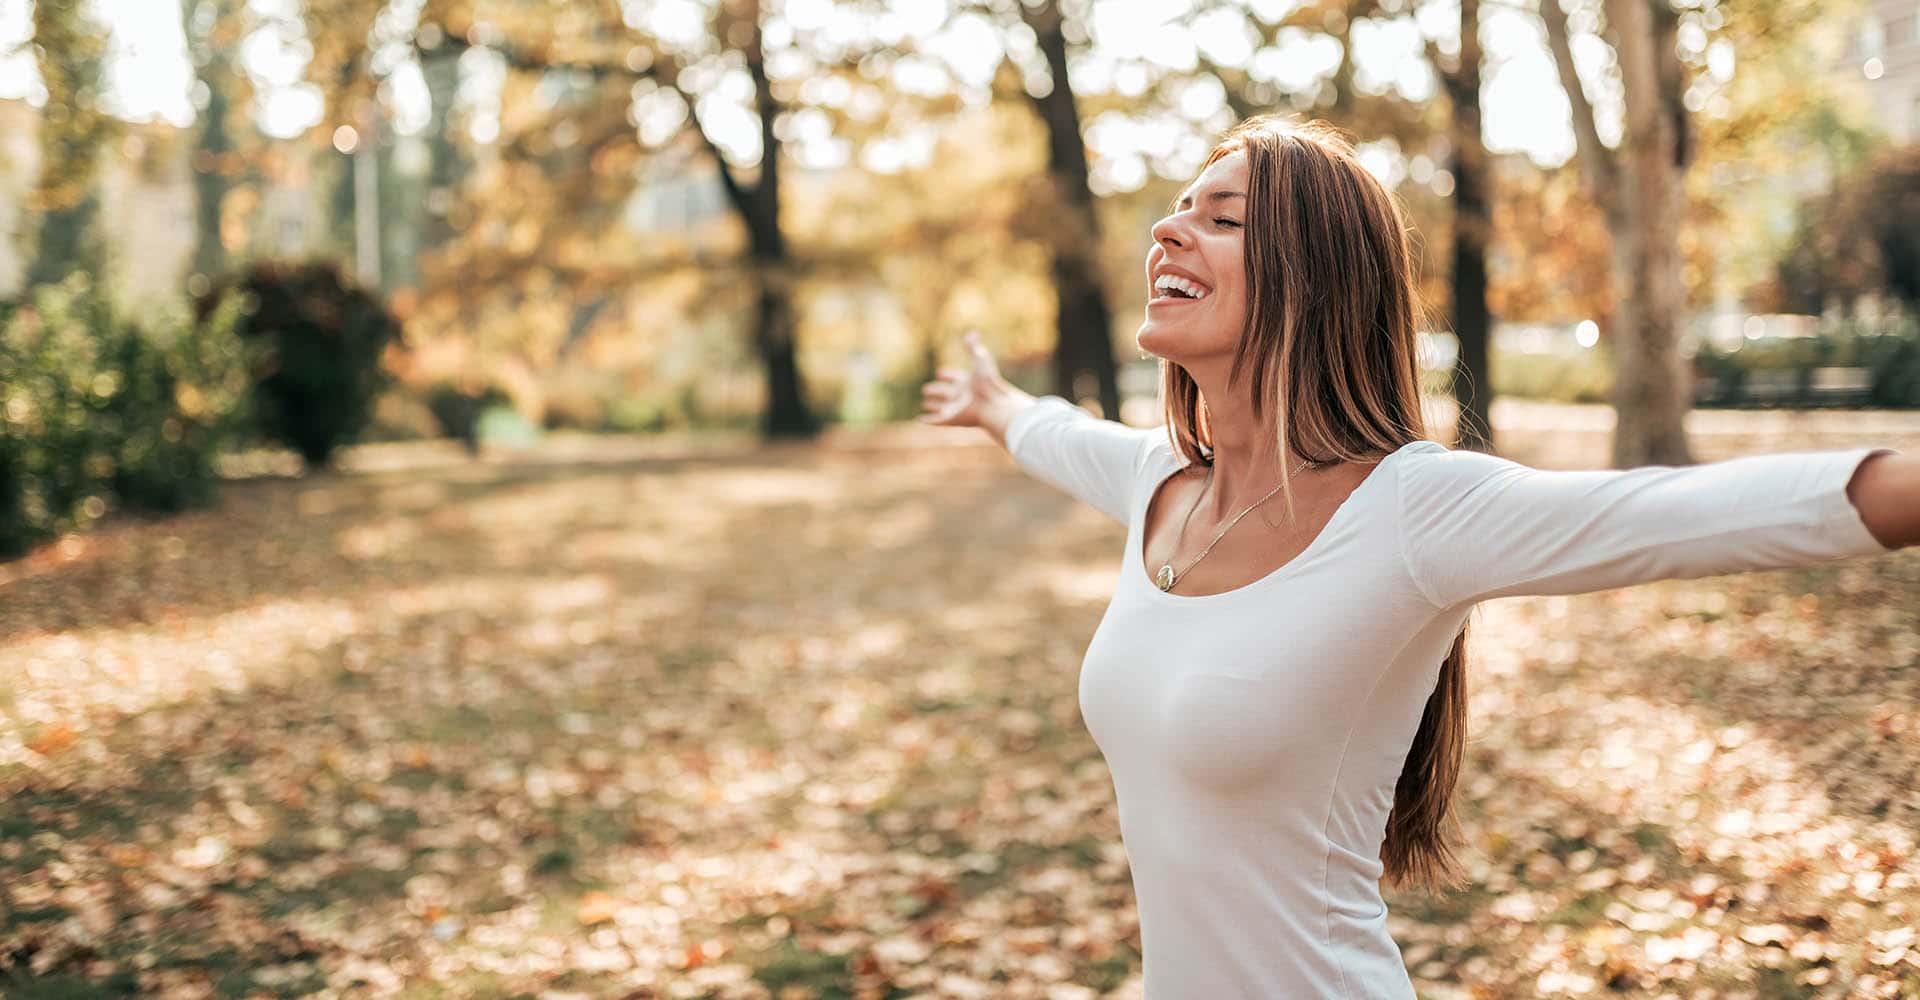 Woman doing breathing exercises outdoors - breathing exercises tips